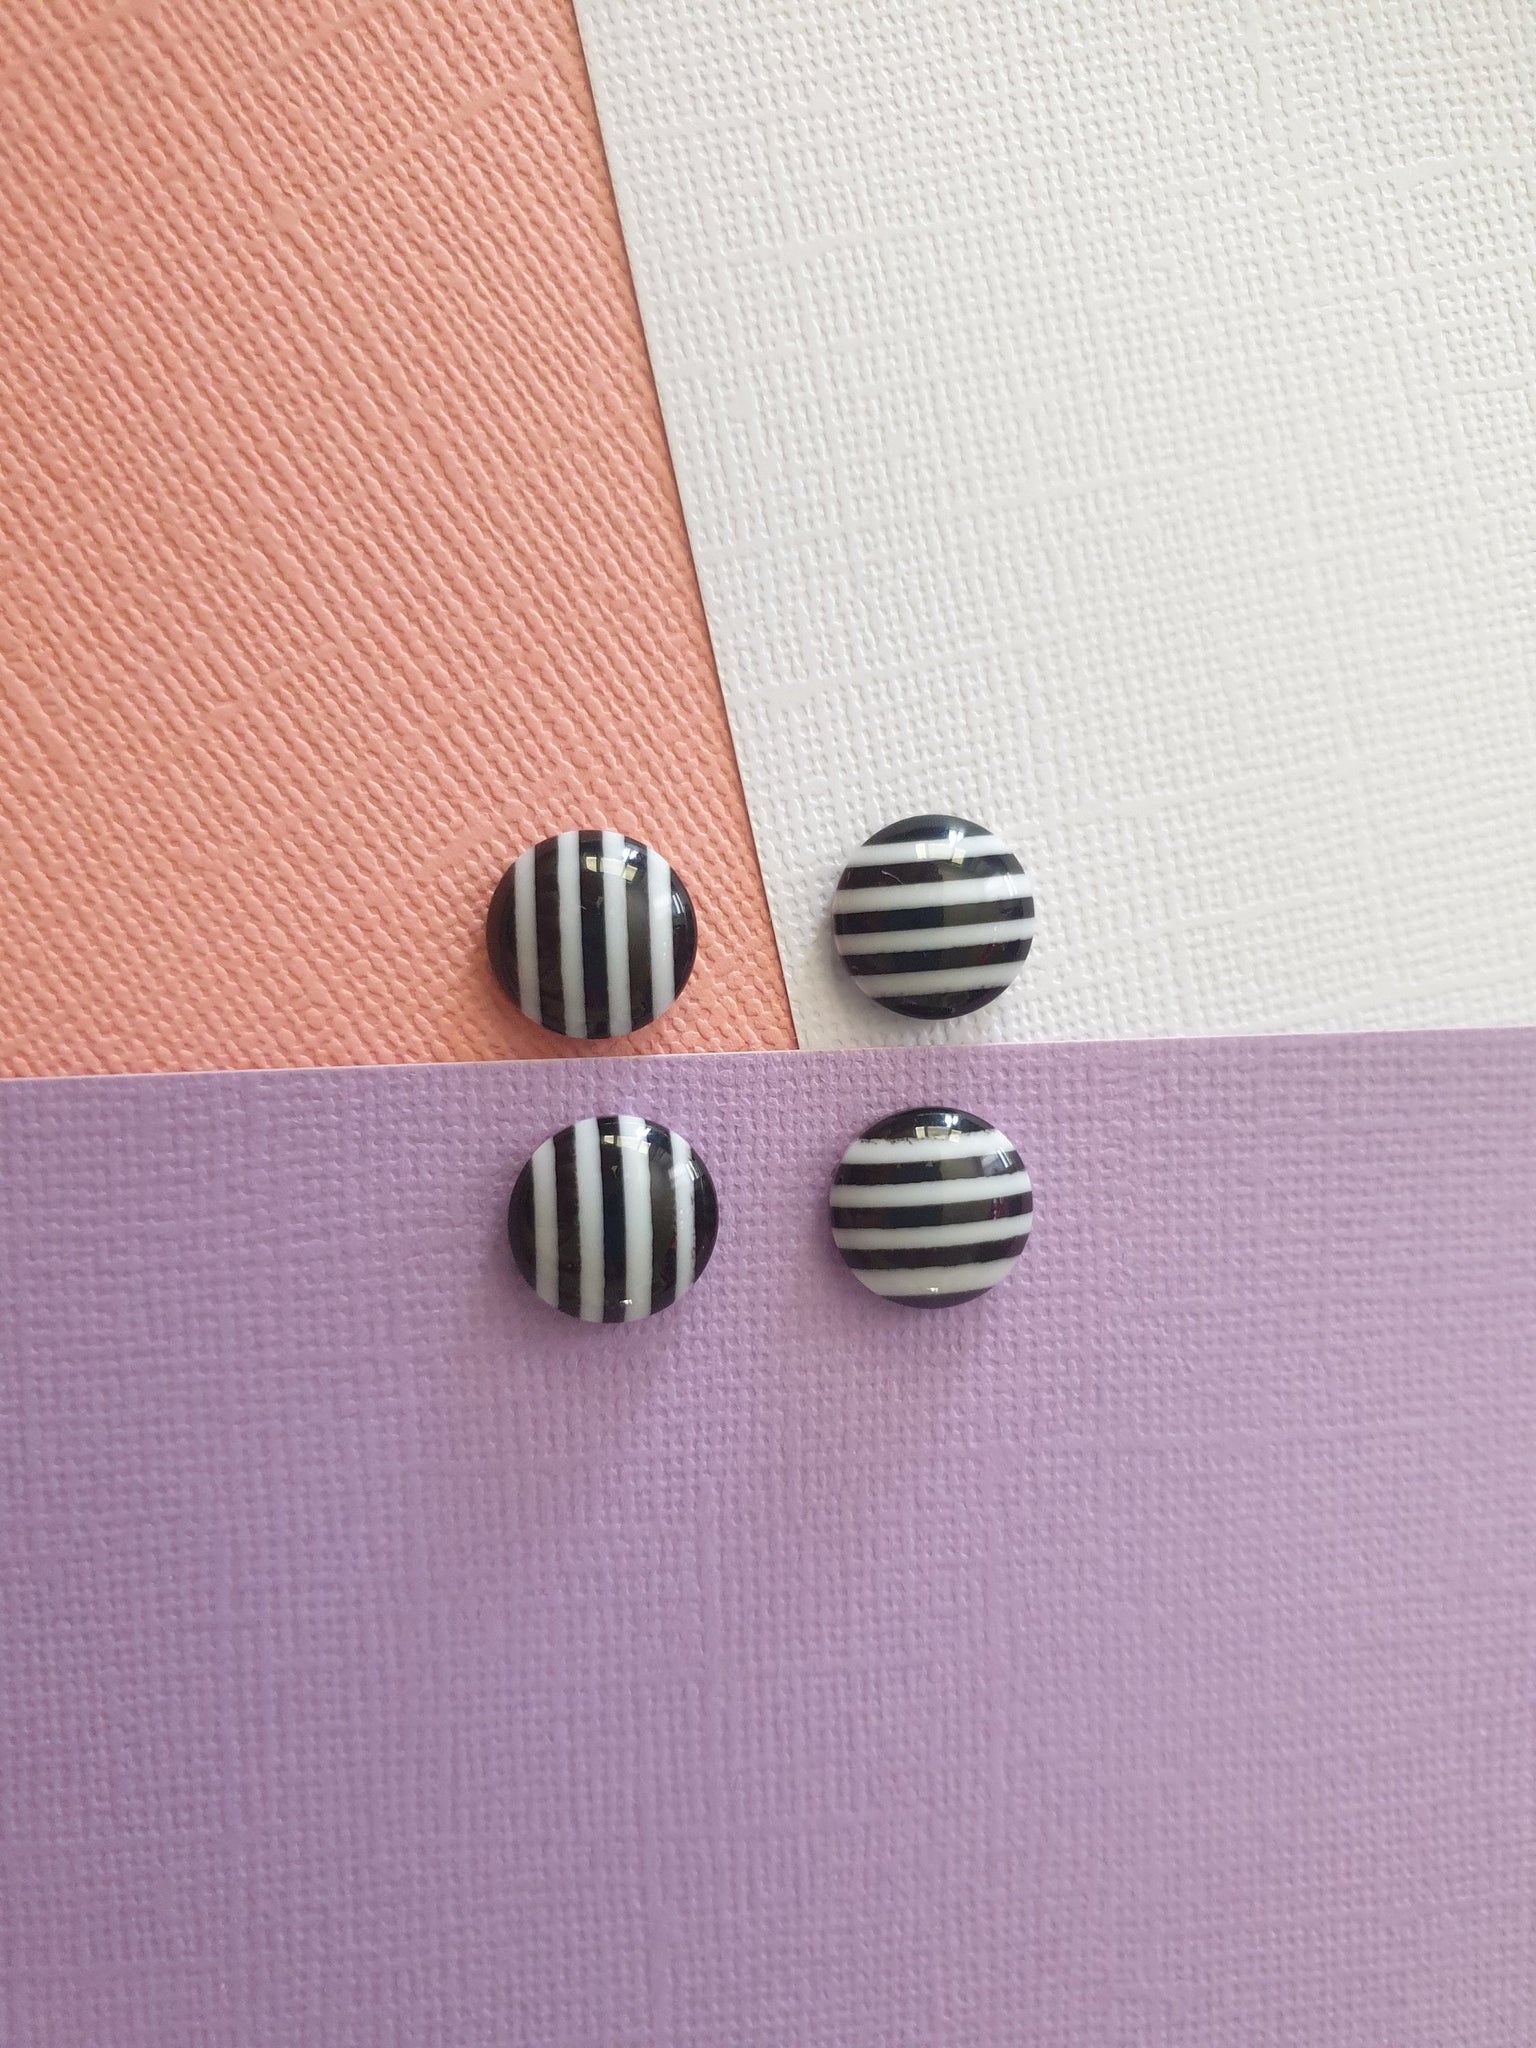 10pcs 12mm Black White Colors stripe Style Flat back Resin Cabochons Fit 12mm Cameo Base Cabochon, jewellery findings and supplies australia